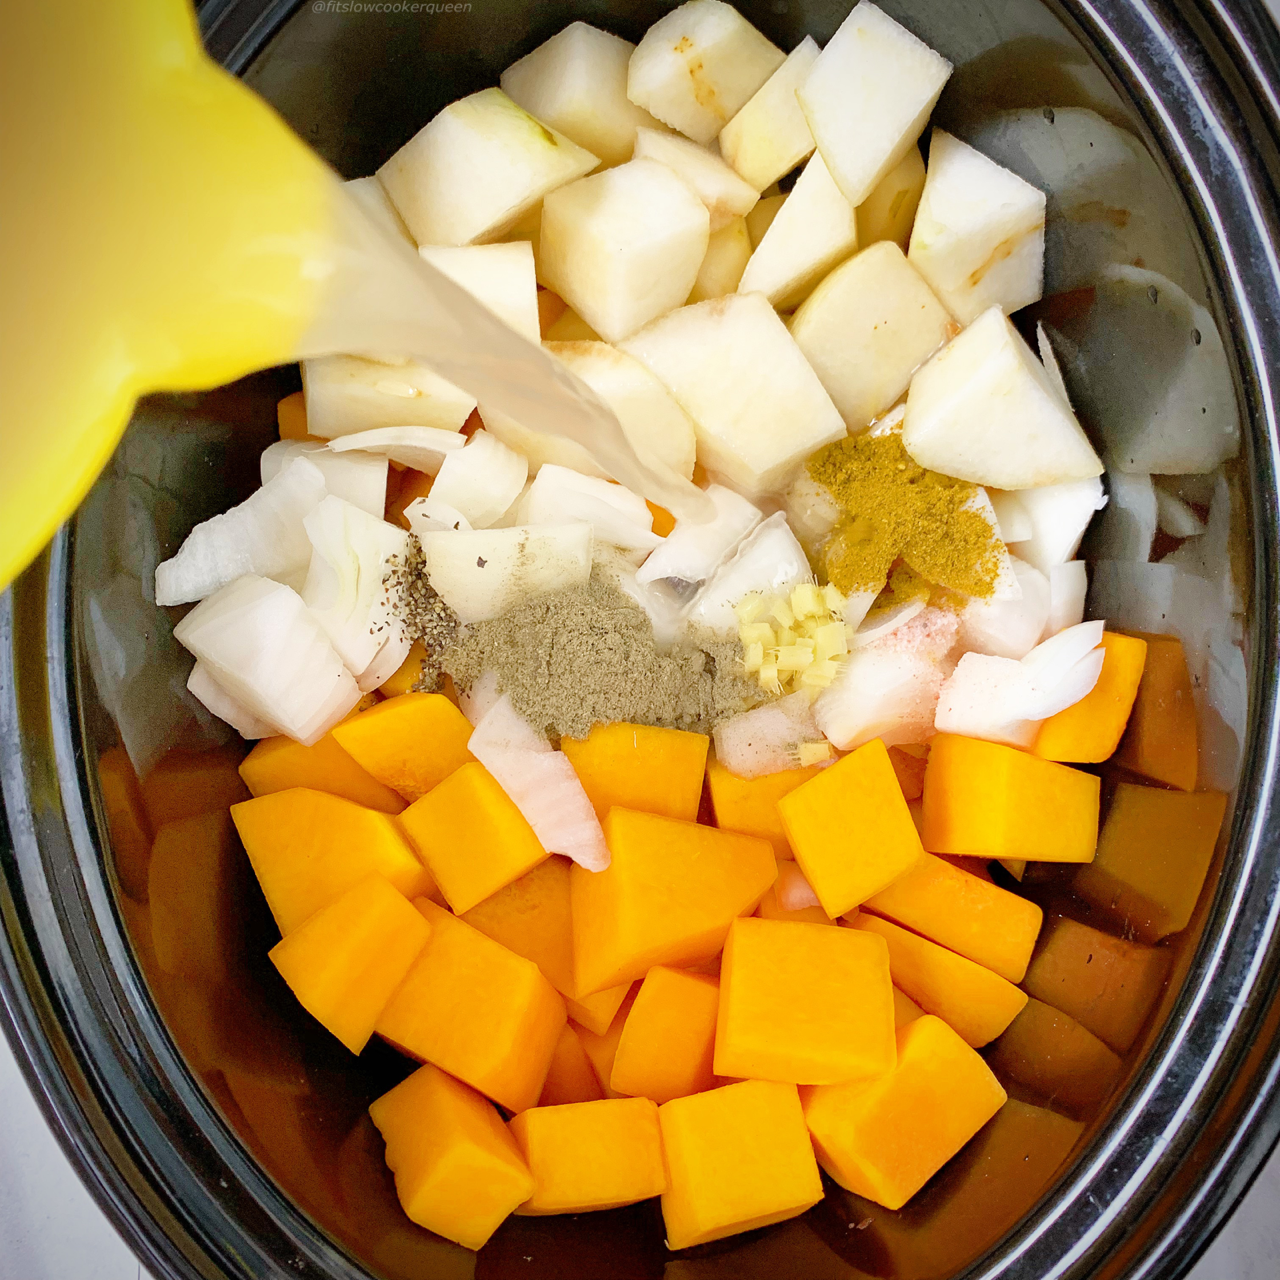 Butternut squash and pears cook together in this vegan and vegetarian recipe. Make this healthy comfort soup in your slow cooker or Instant Pot.